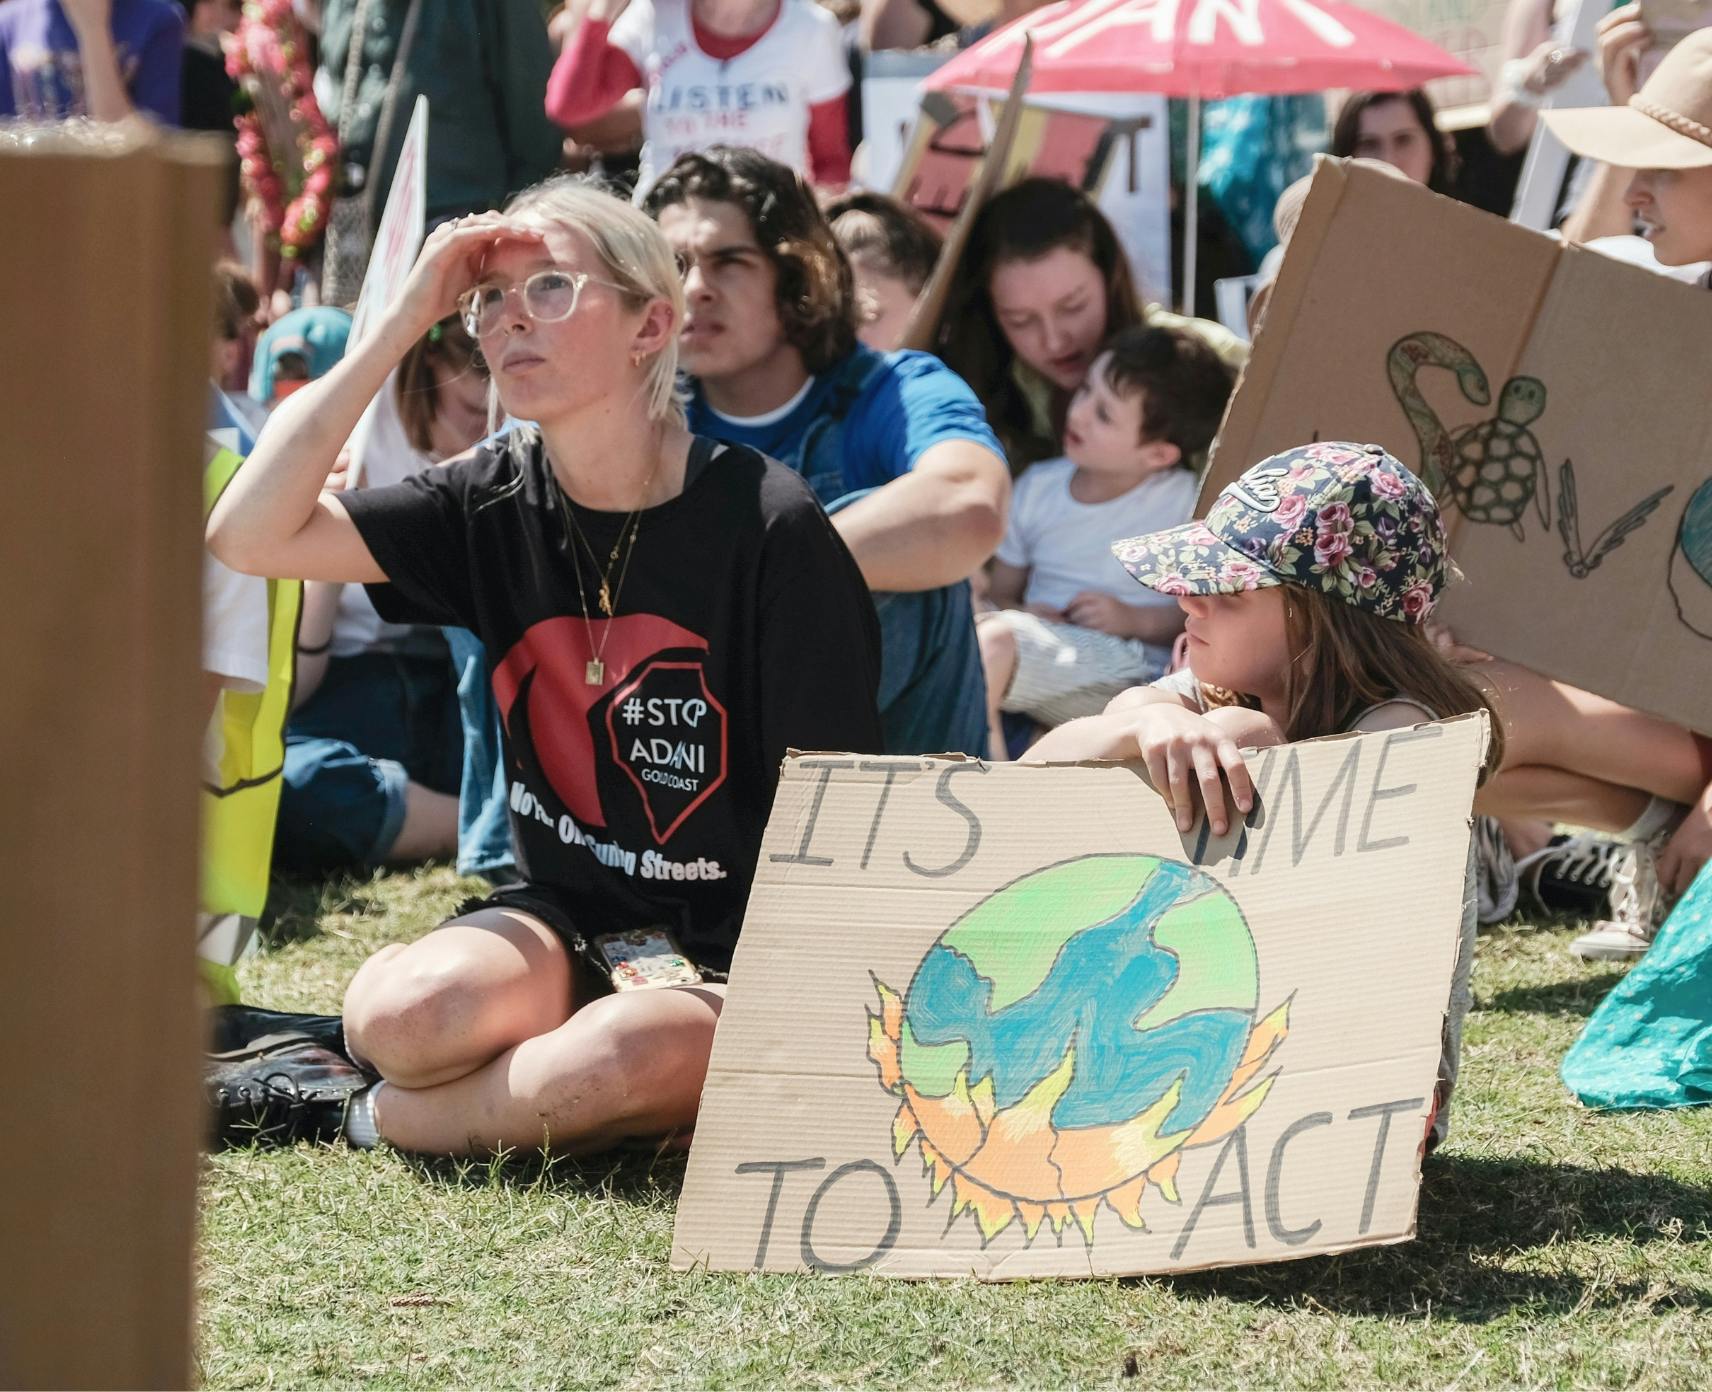 Two young protestors sit down on grass. Their sign reads its time to act.